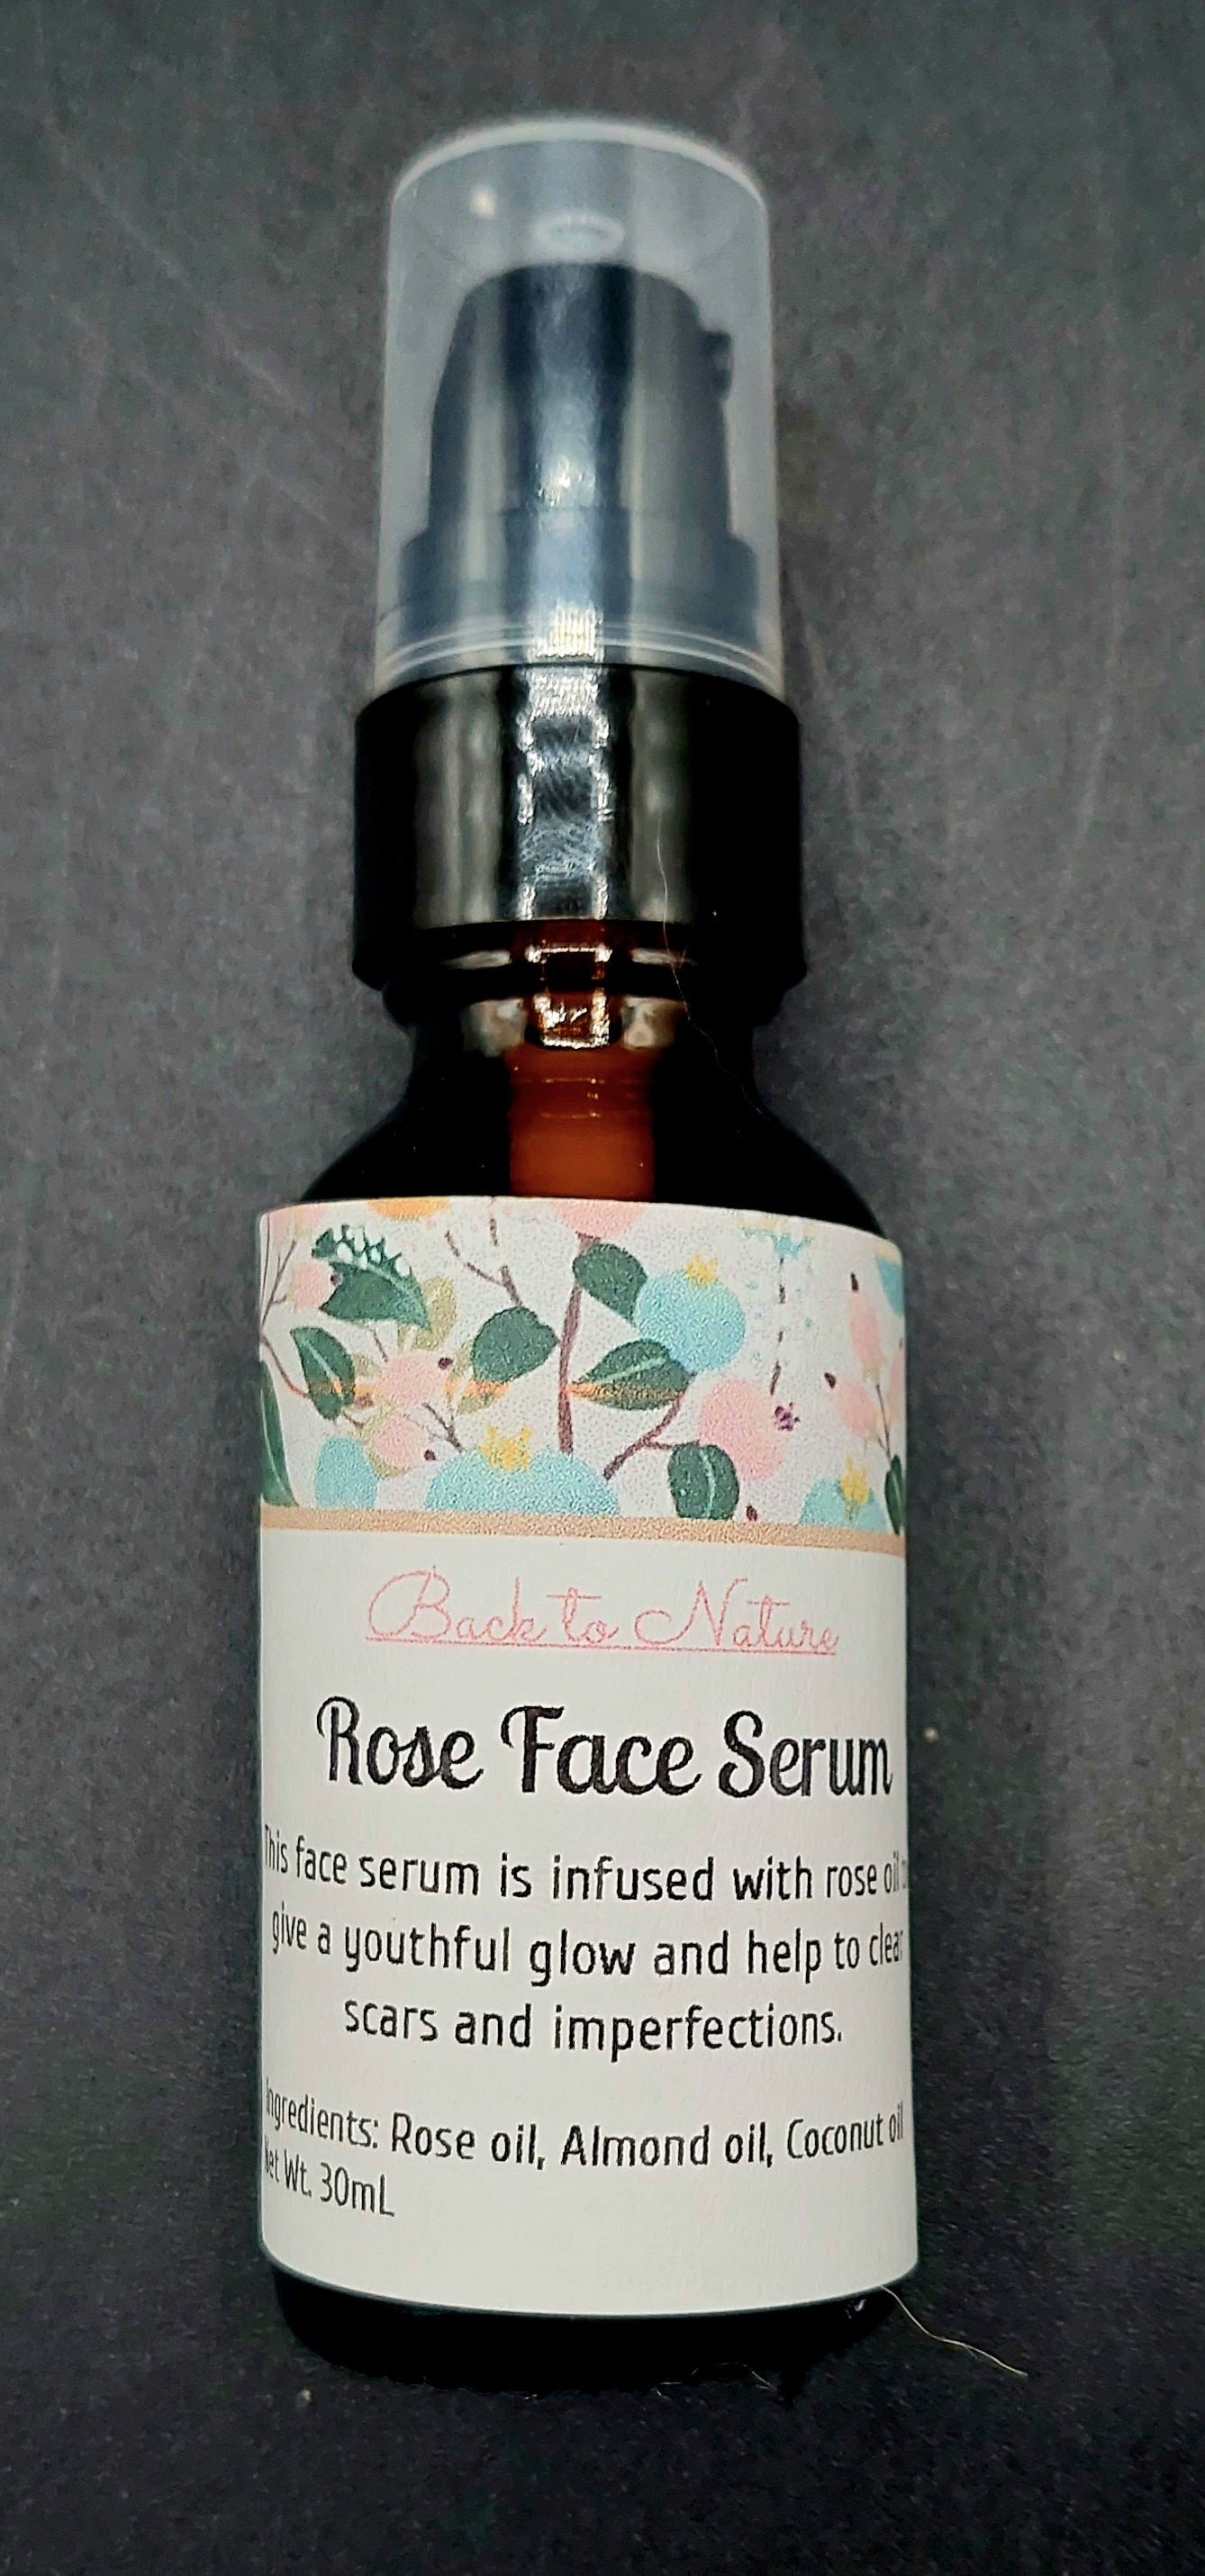 Back To Nature- Rose Face Serum